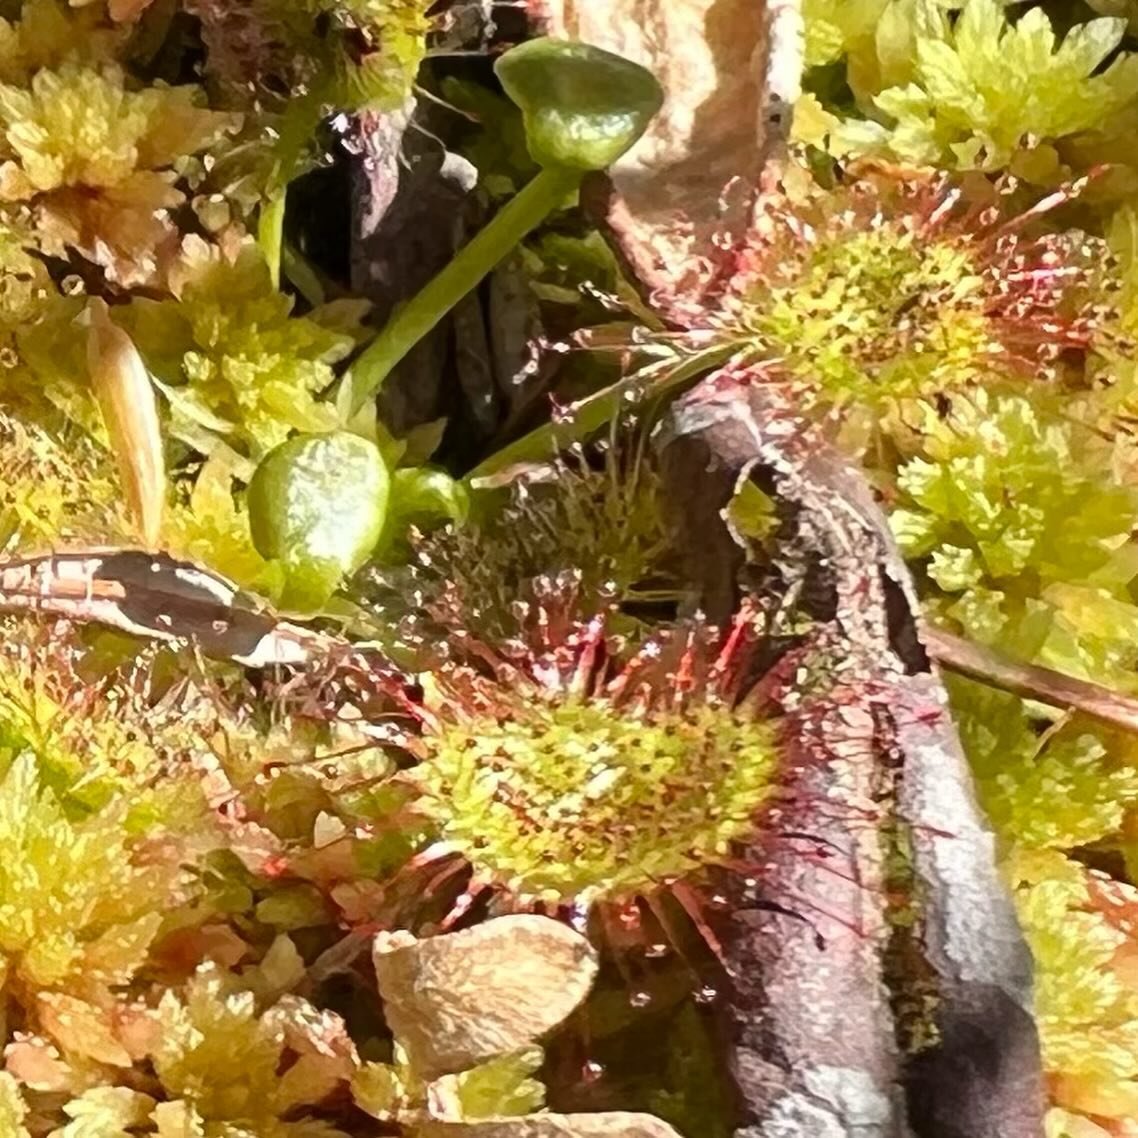 Highlights from touring Whispering Firs Bog with the Land Trust! Sundews (carnivorous), bog laurels, Labrador tea and of course sphagnum mosses galore! 

The cedars and hemlocks growing in the bog are so stunted and deprived of nitrogen that they are